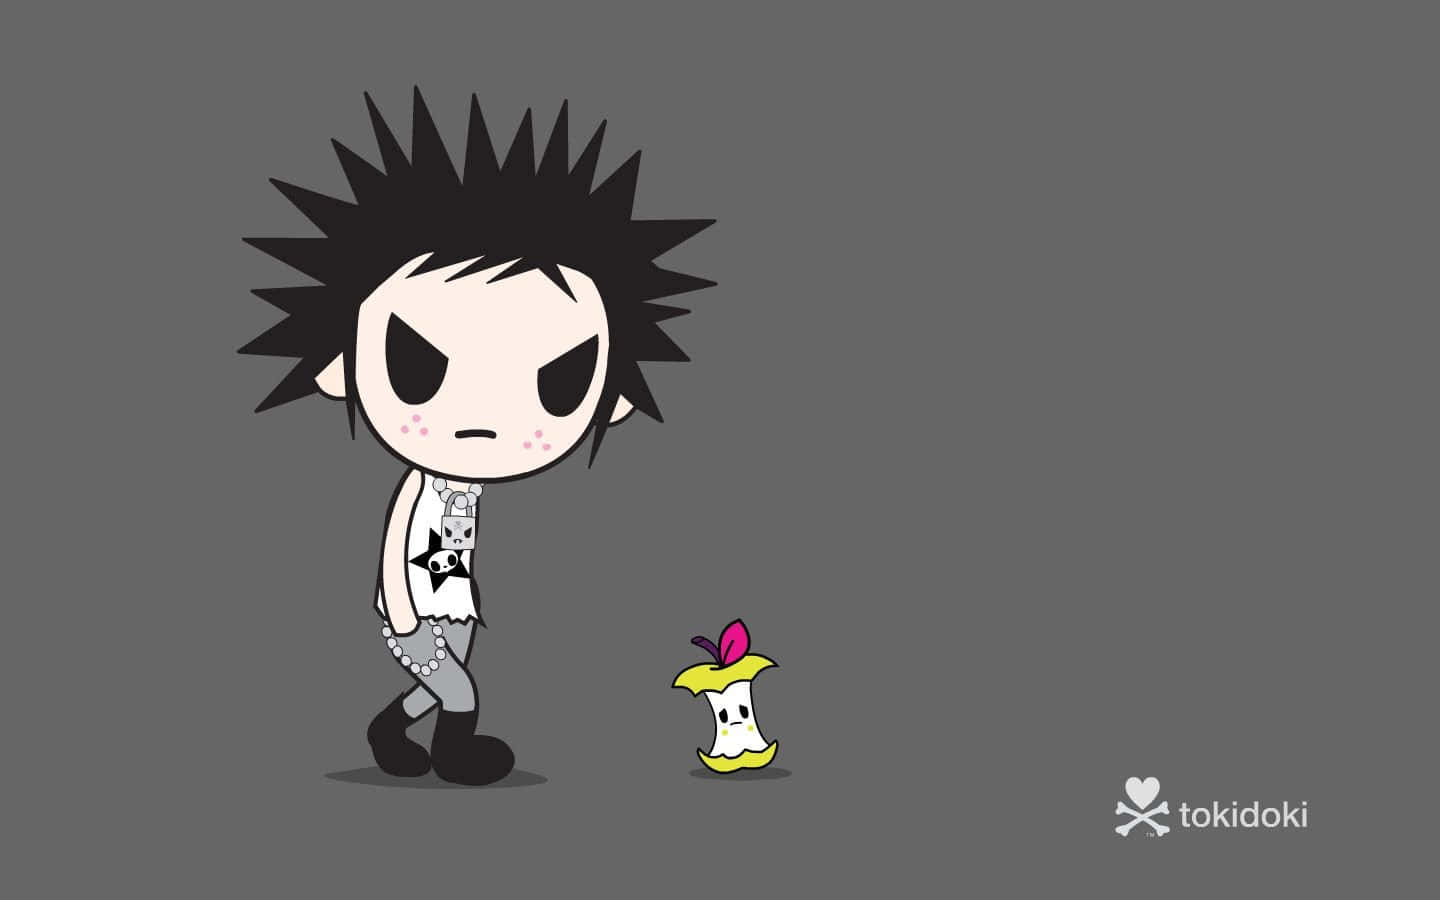 A Cartoon Character With A Spiked Hair And A Yellow Bird Wallpaper